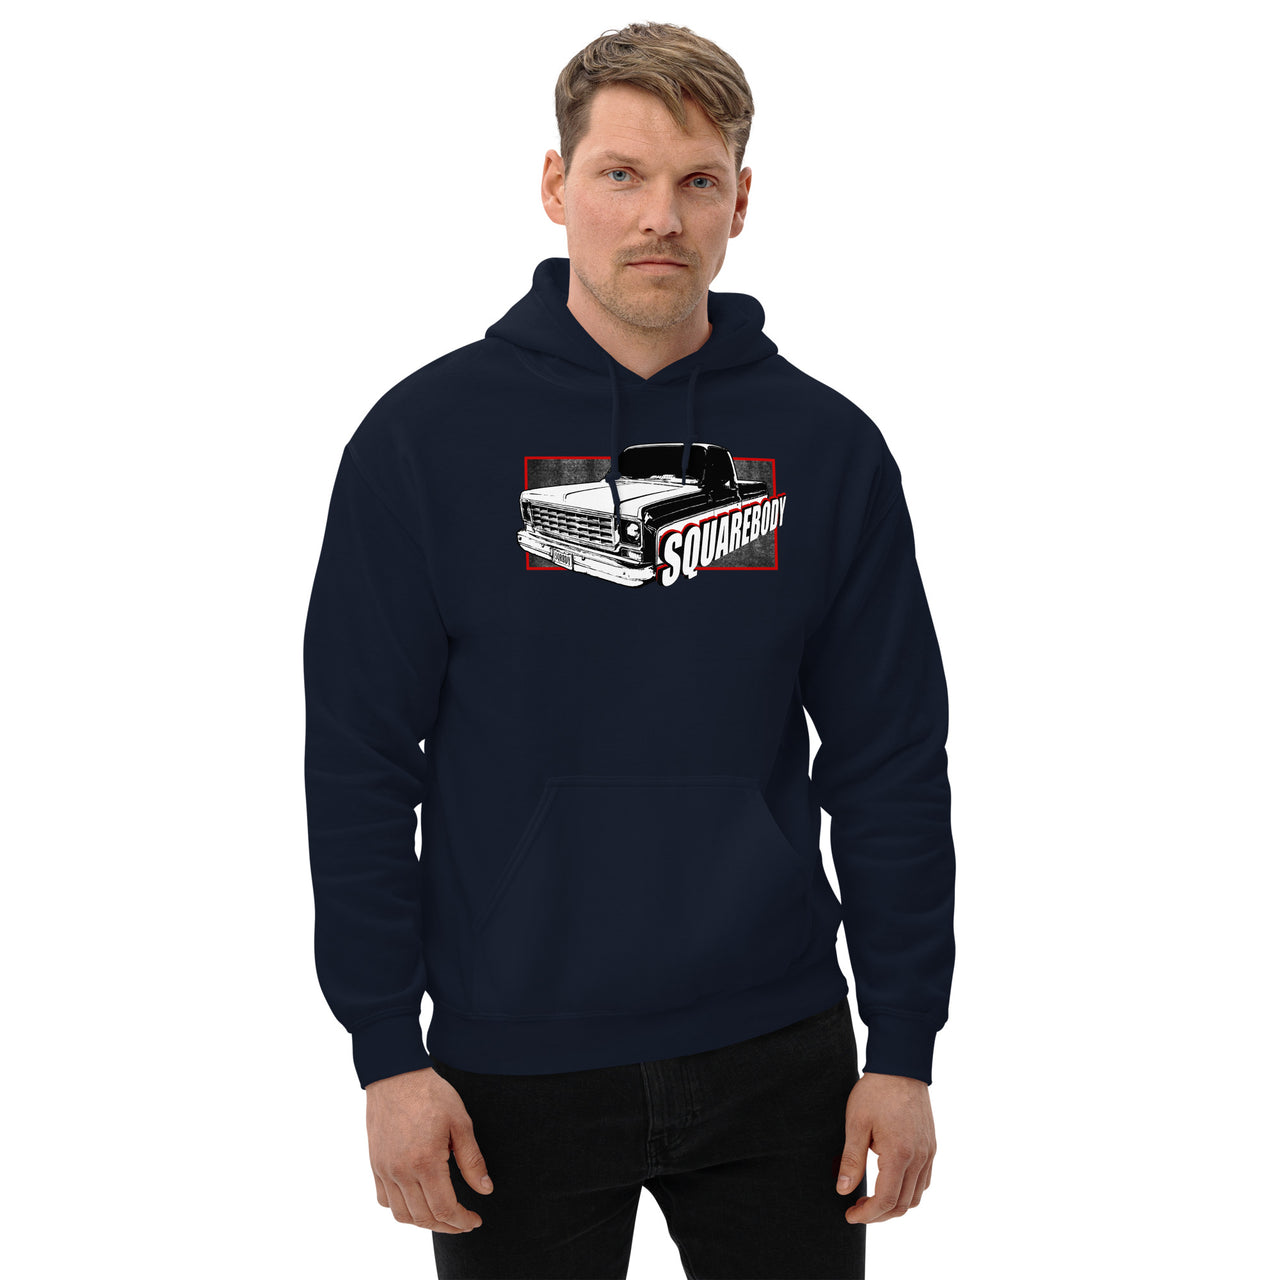 Round Eye Square Body Truck Hoodie modeled in navy